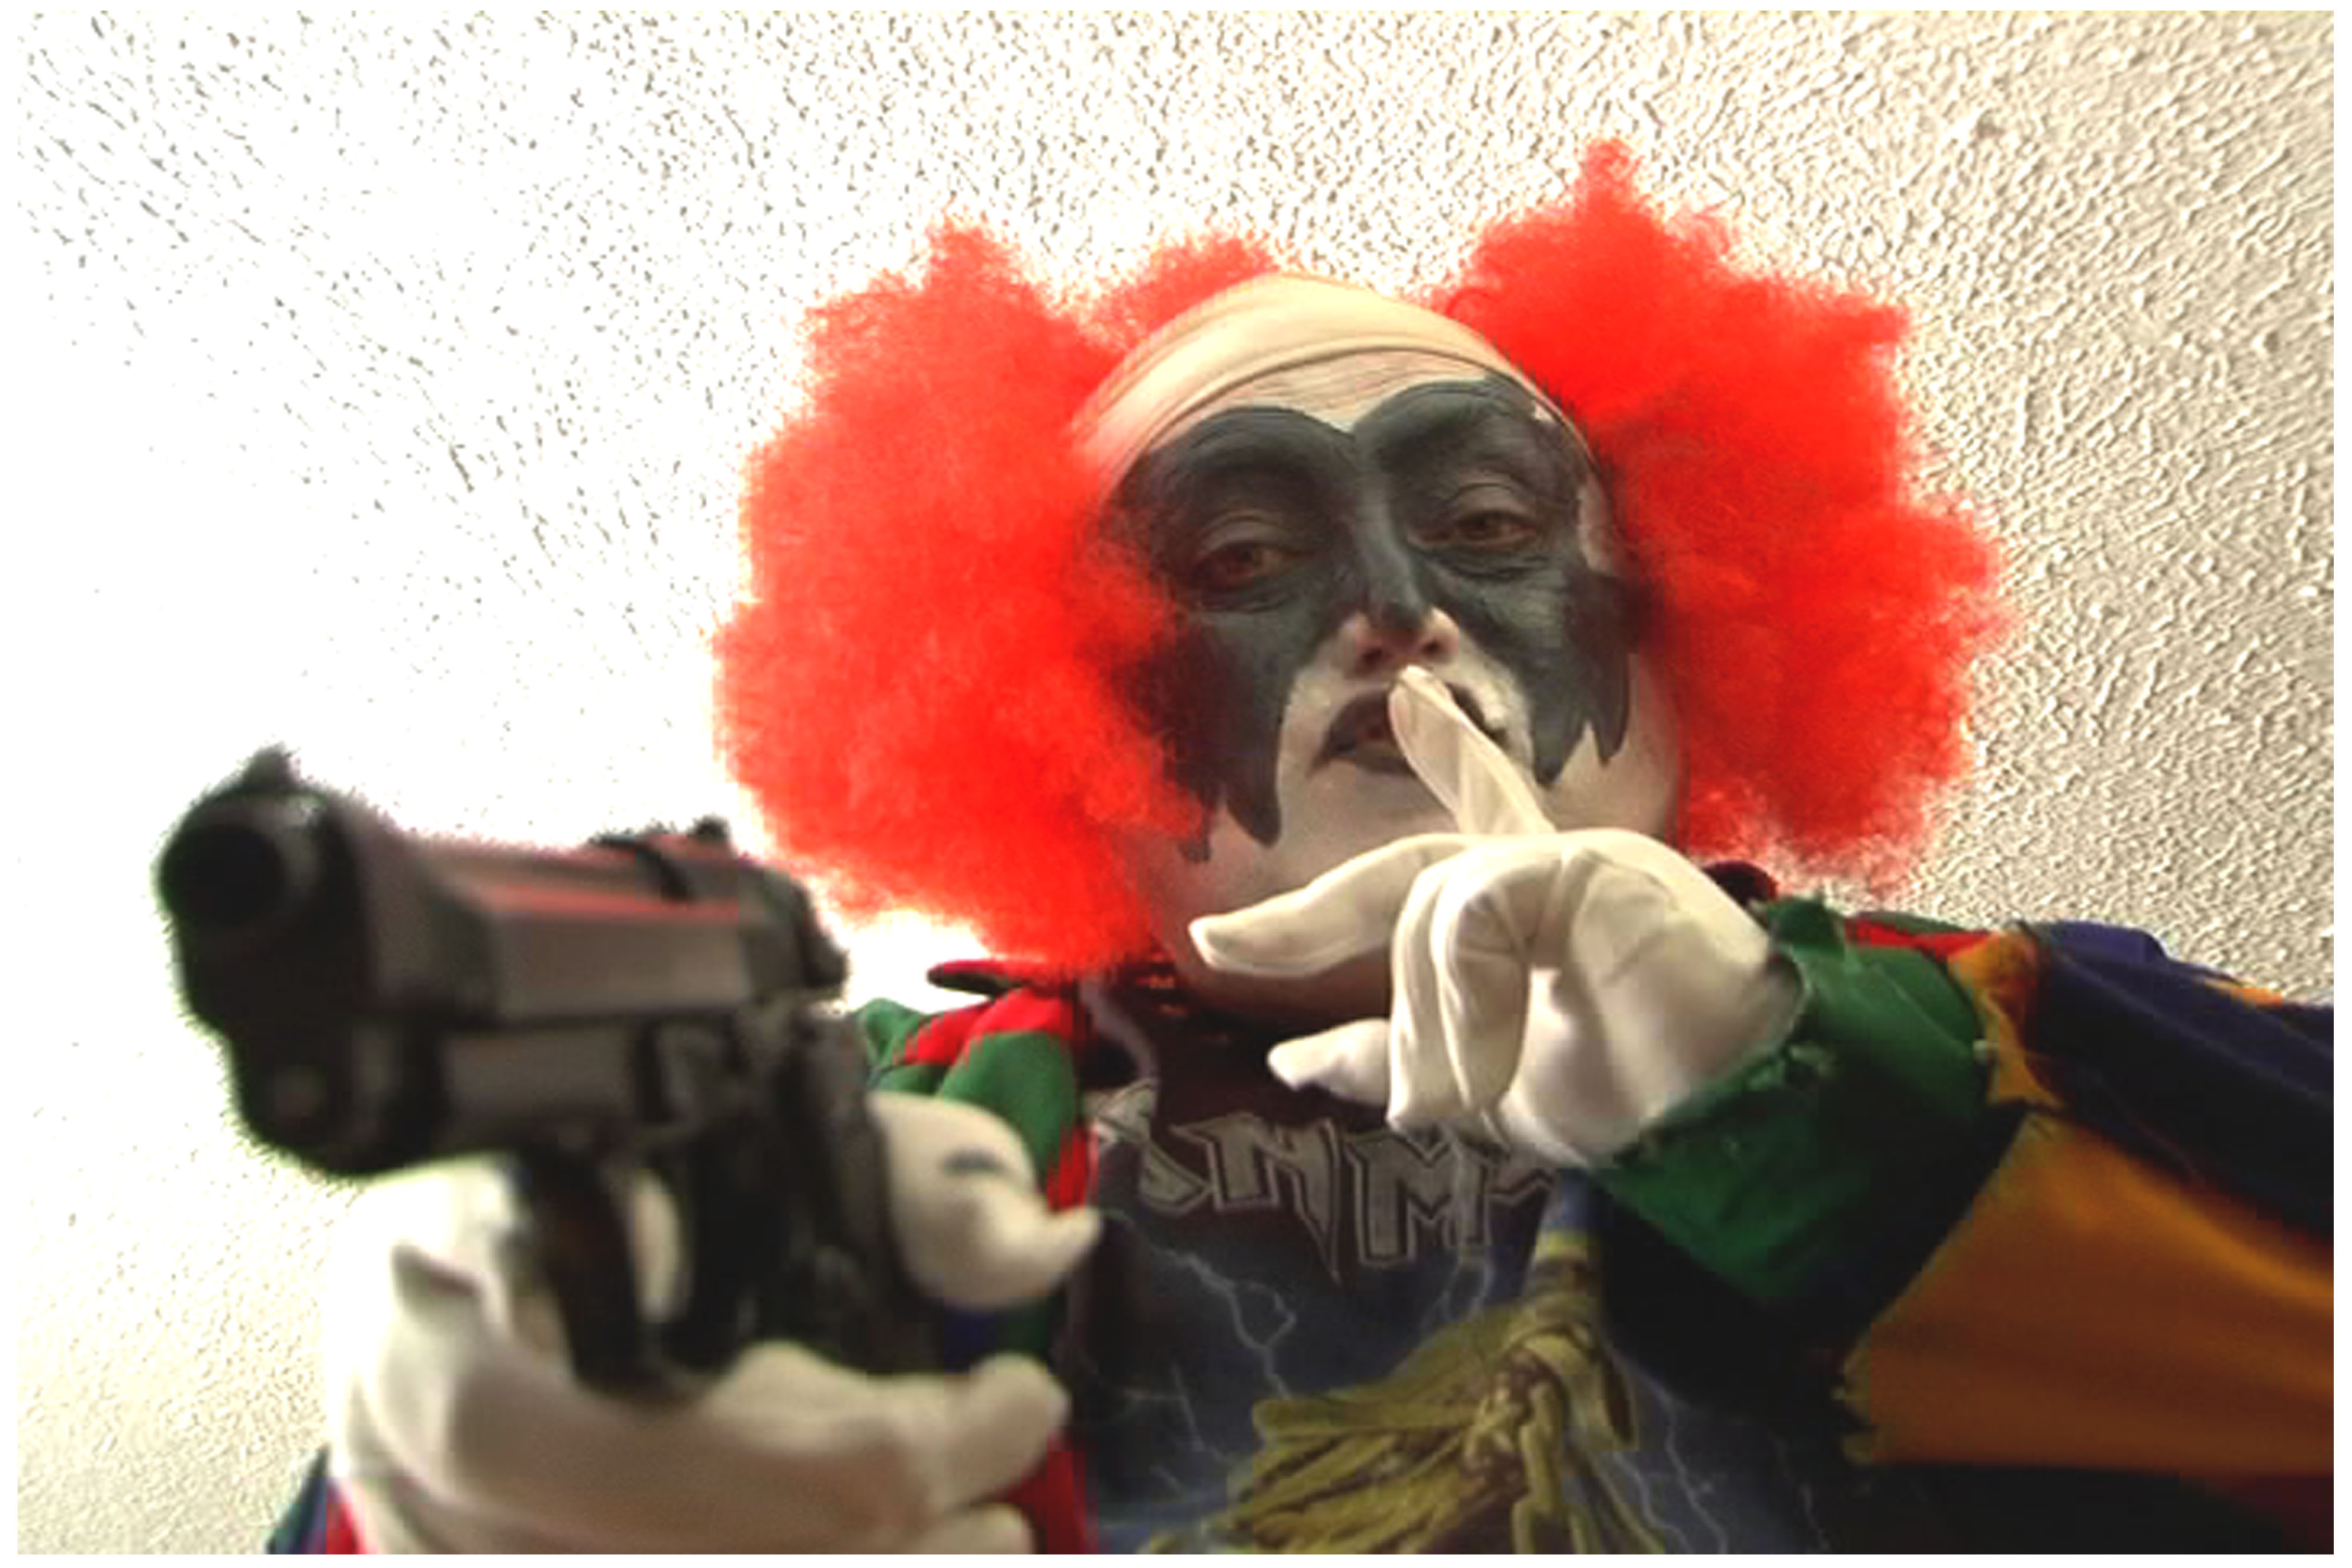 Lee Armstrong as Puddles the homicidal Clown